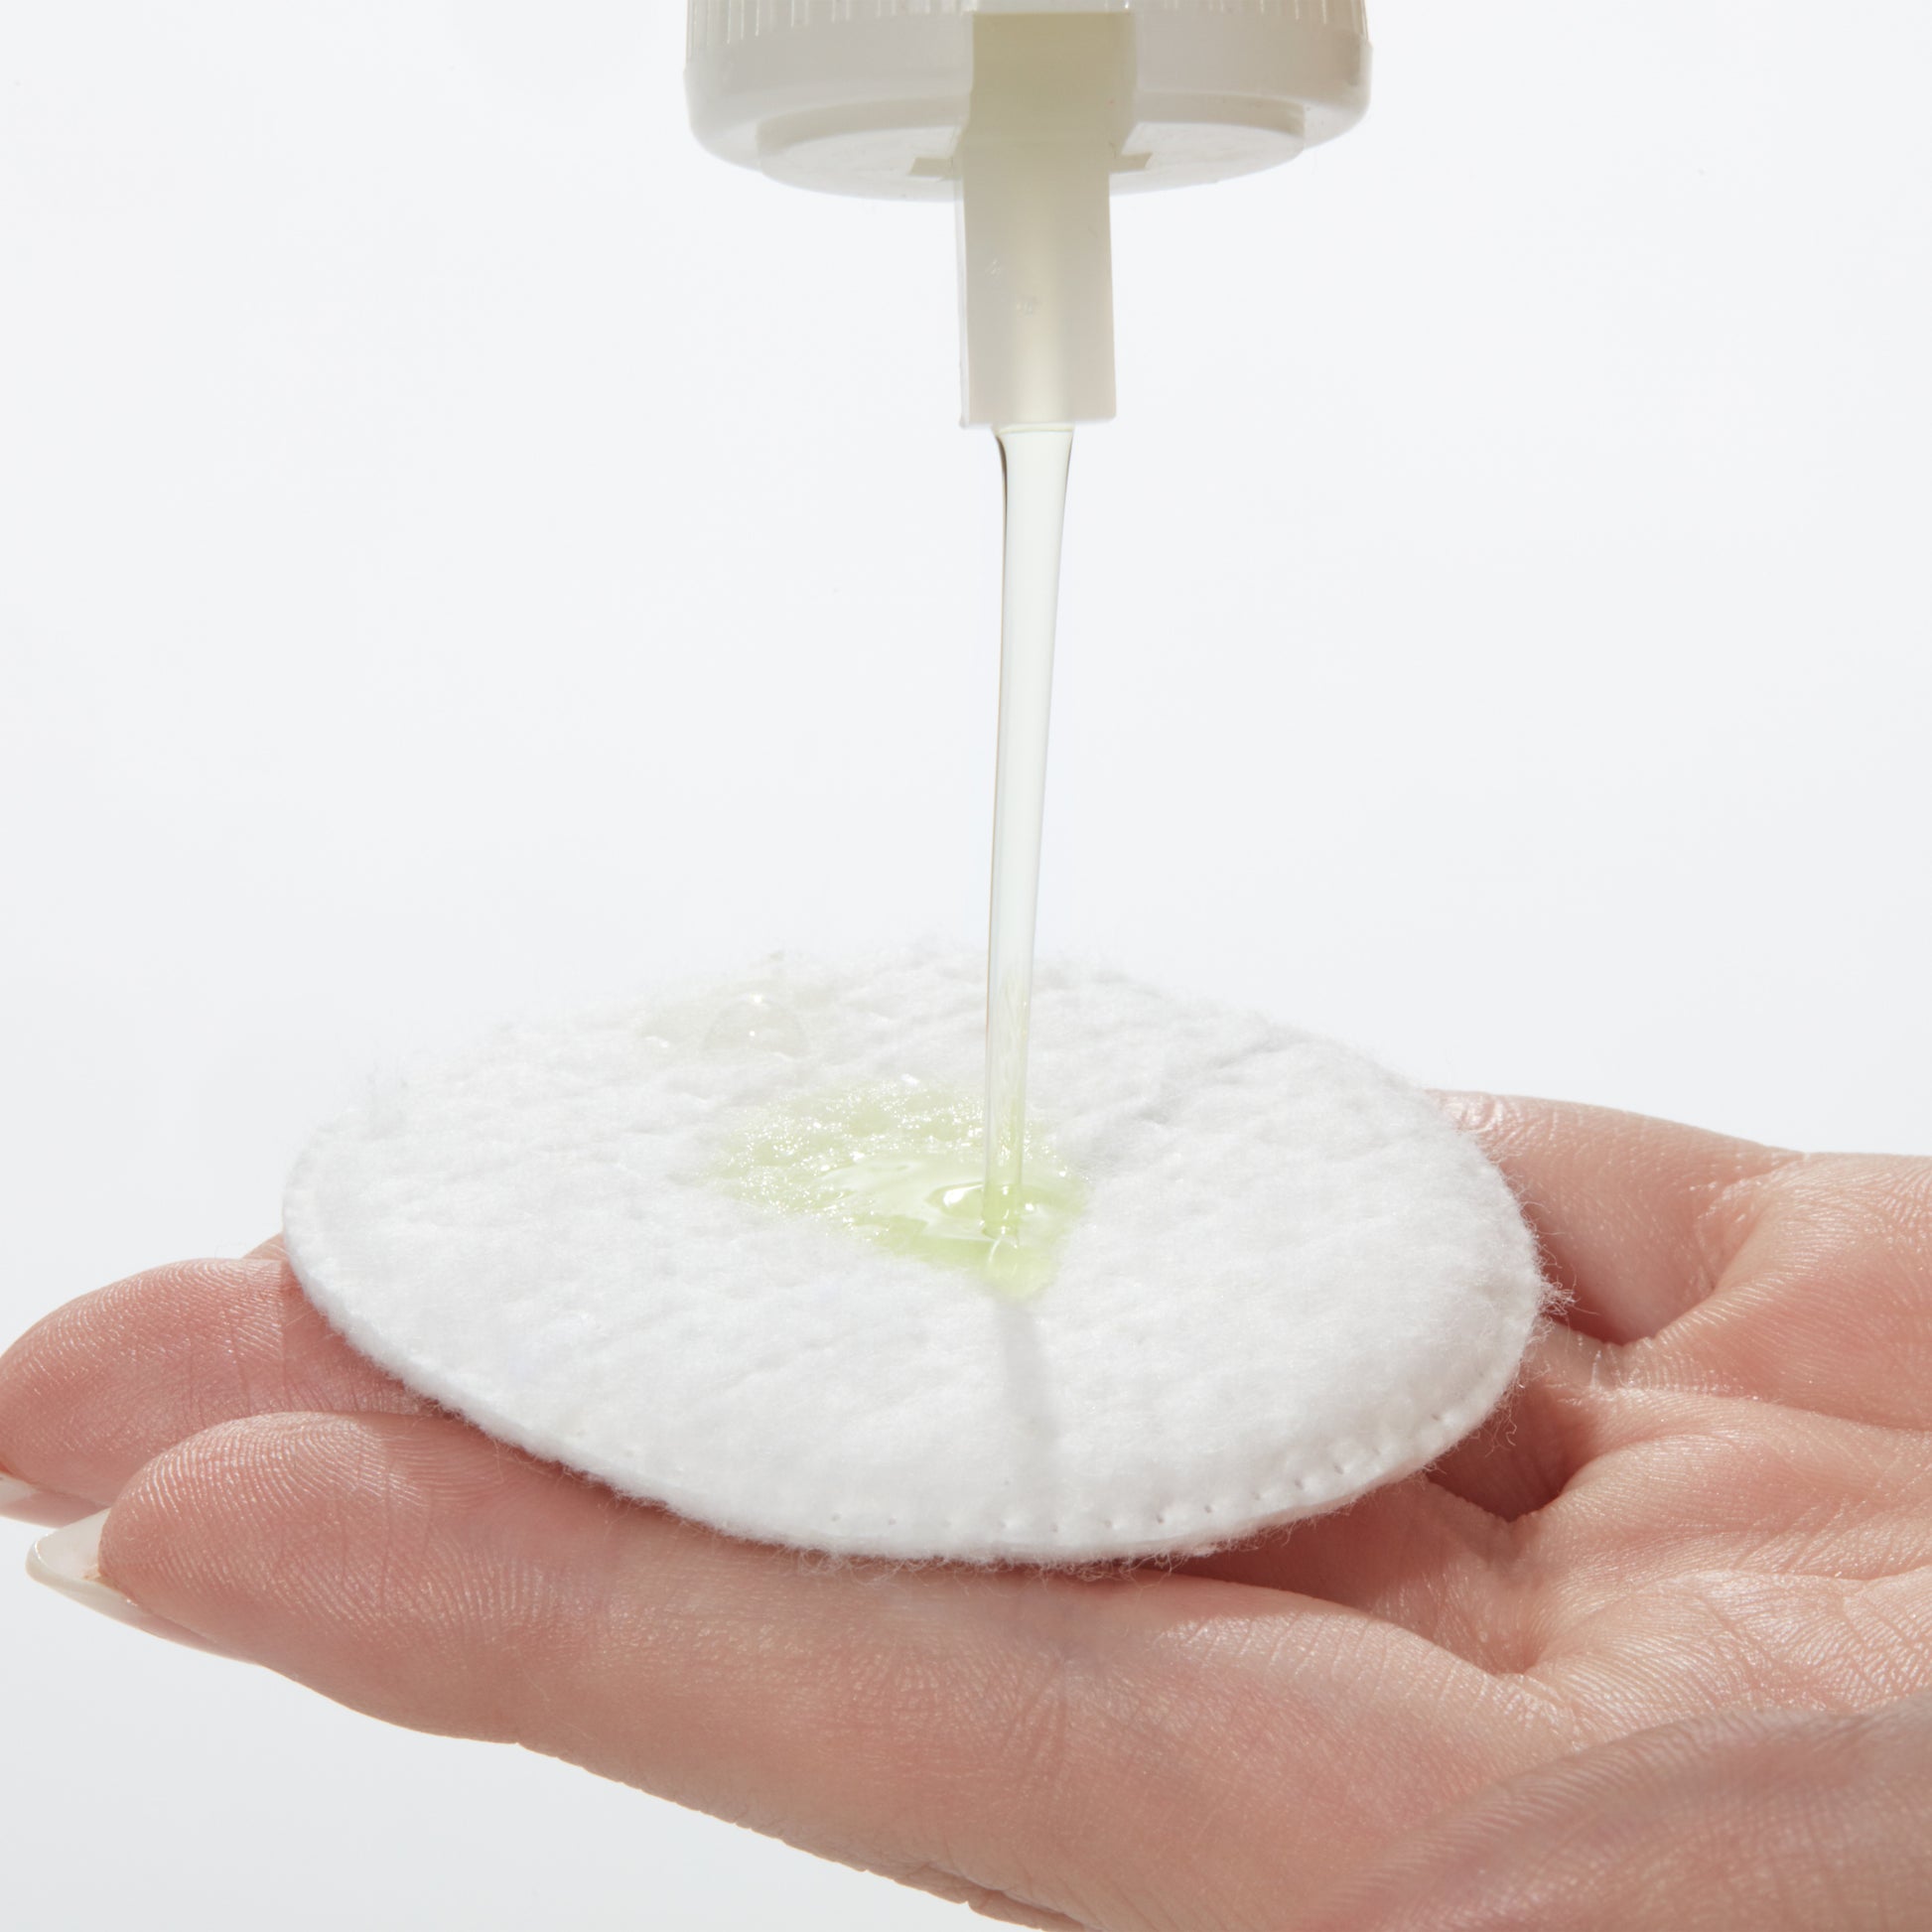 Demonstration showing how to use Keratoplast Cleansing Lotion on a cotton pad